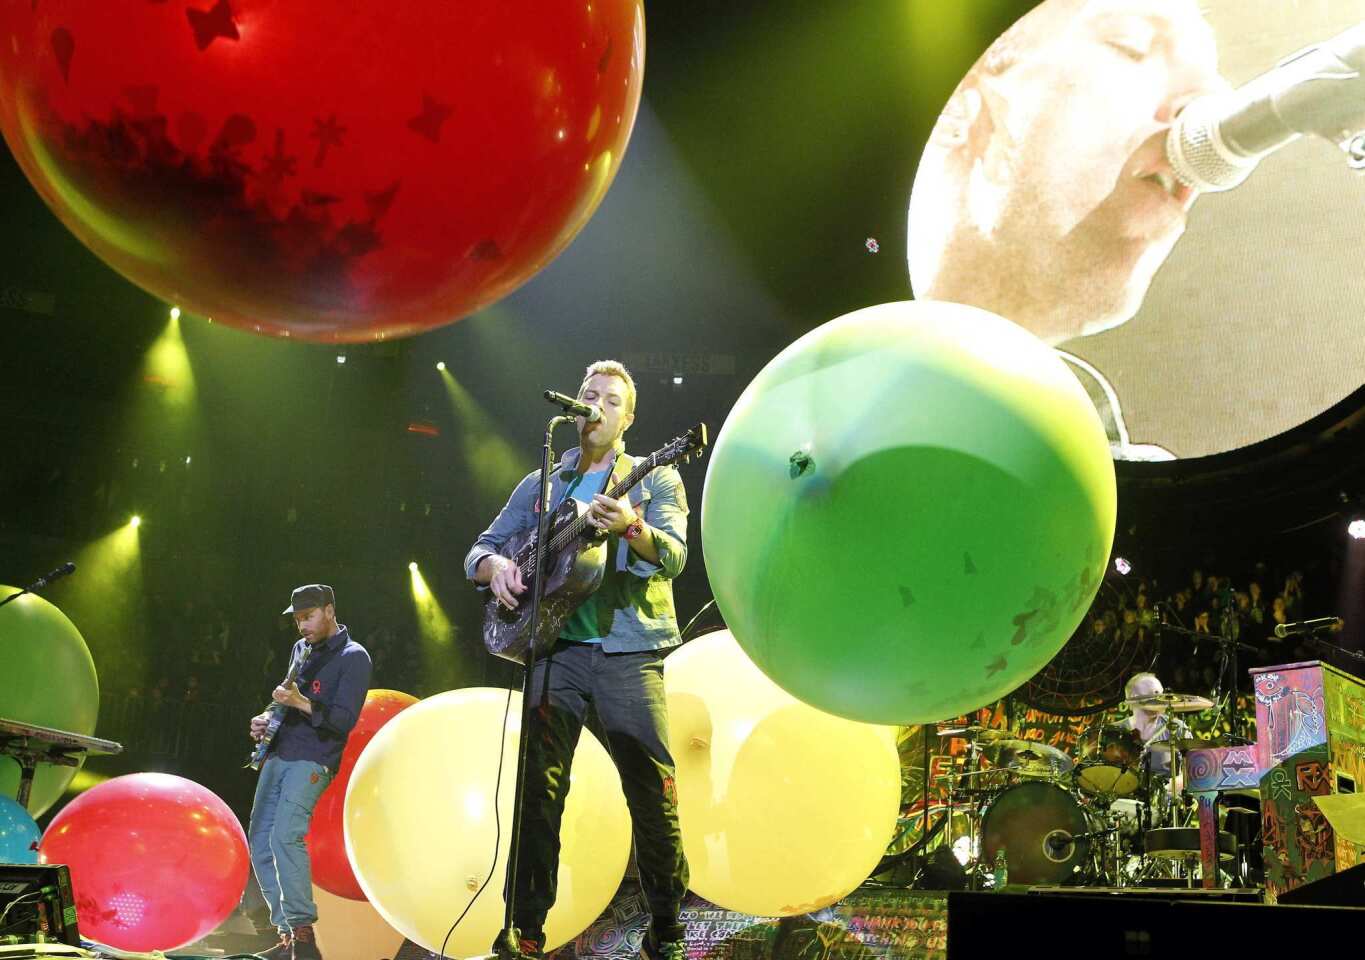 Coldplay's fifth album, "Mylo Xyloto," sees the band once again placing moderately pleasant orchestral rock arrangements around lyrics fit for Hallmark cards, writes Times critic Randall Roberts.